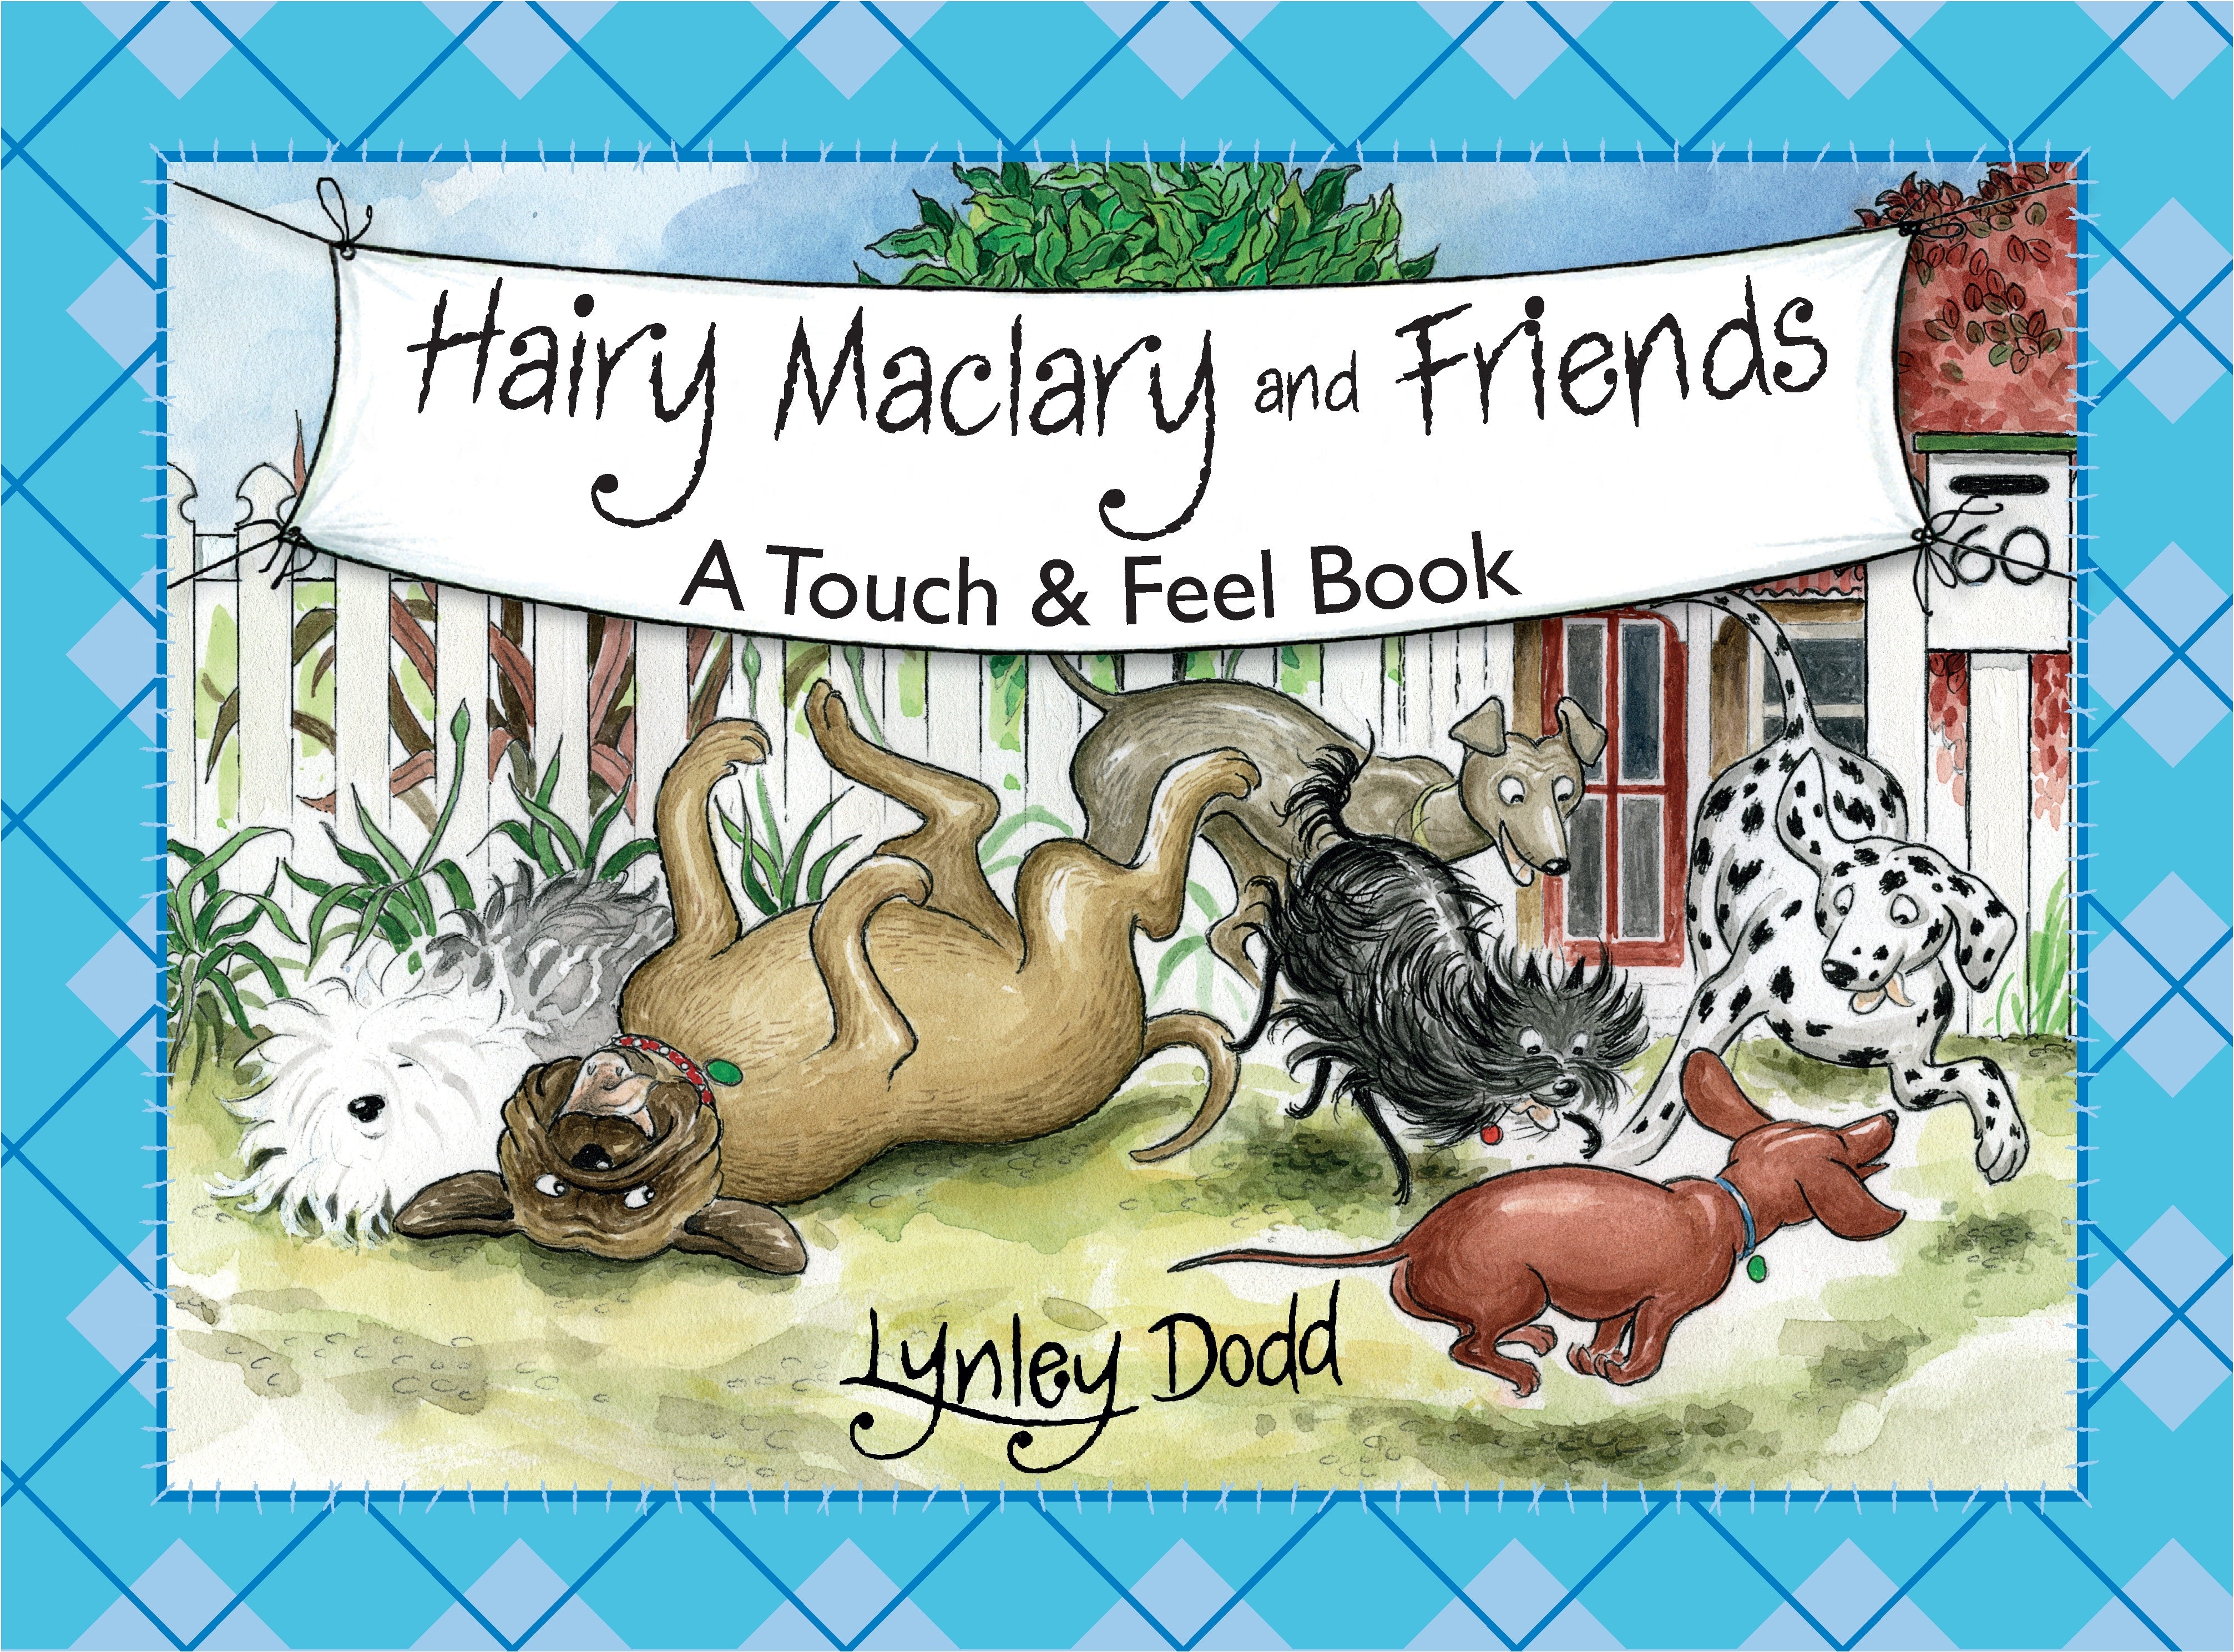 Hairy Maclary and Friends, A Touch and Feel Book- hardback